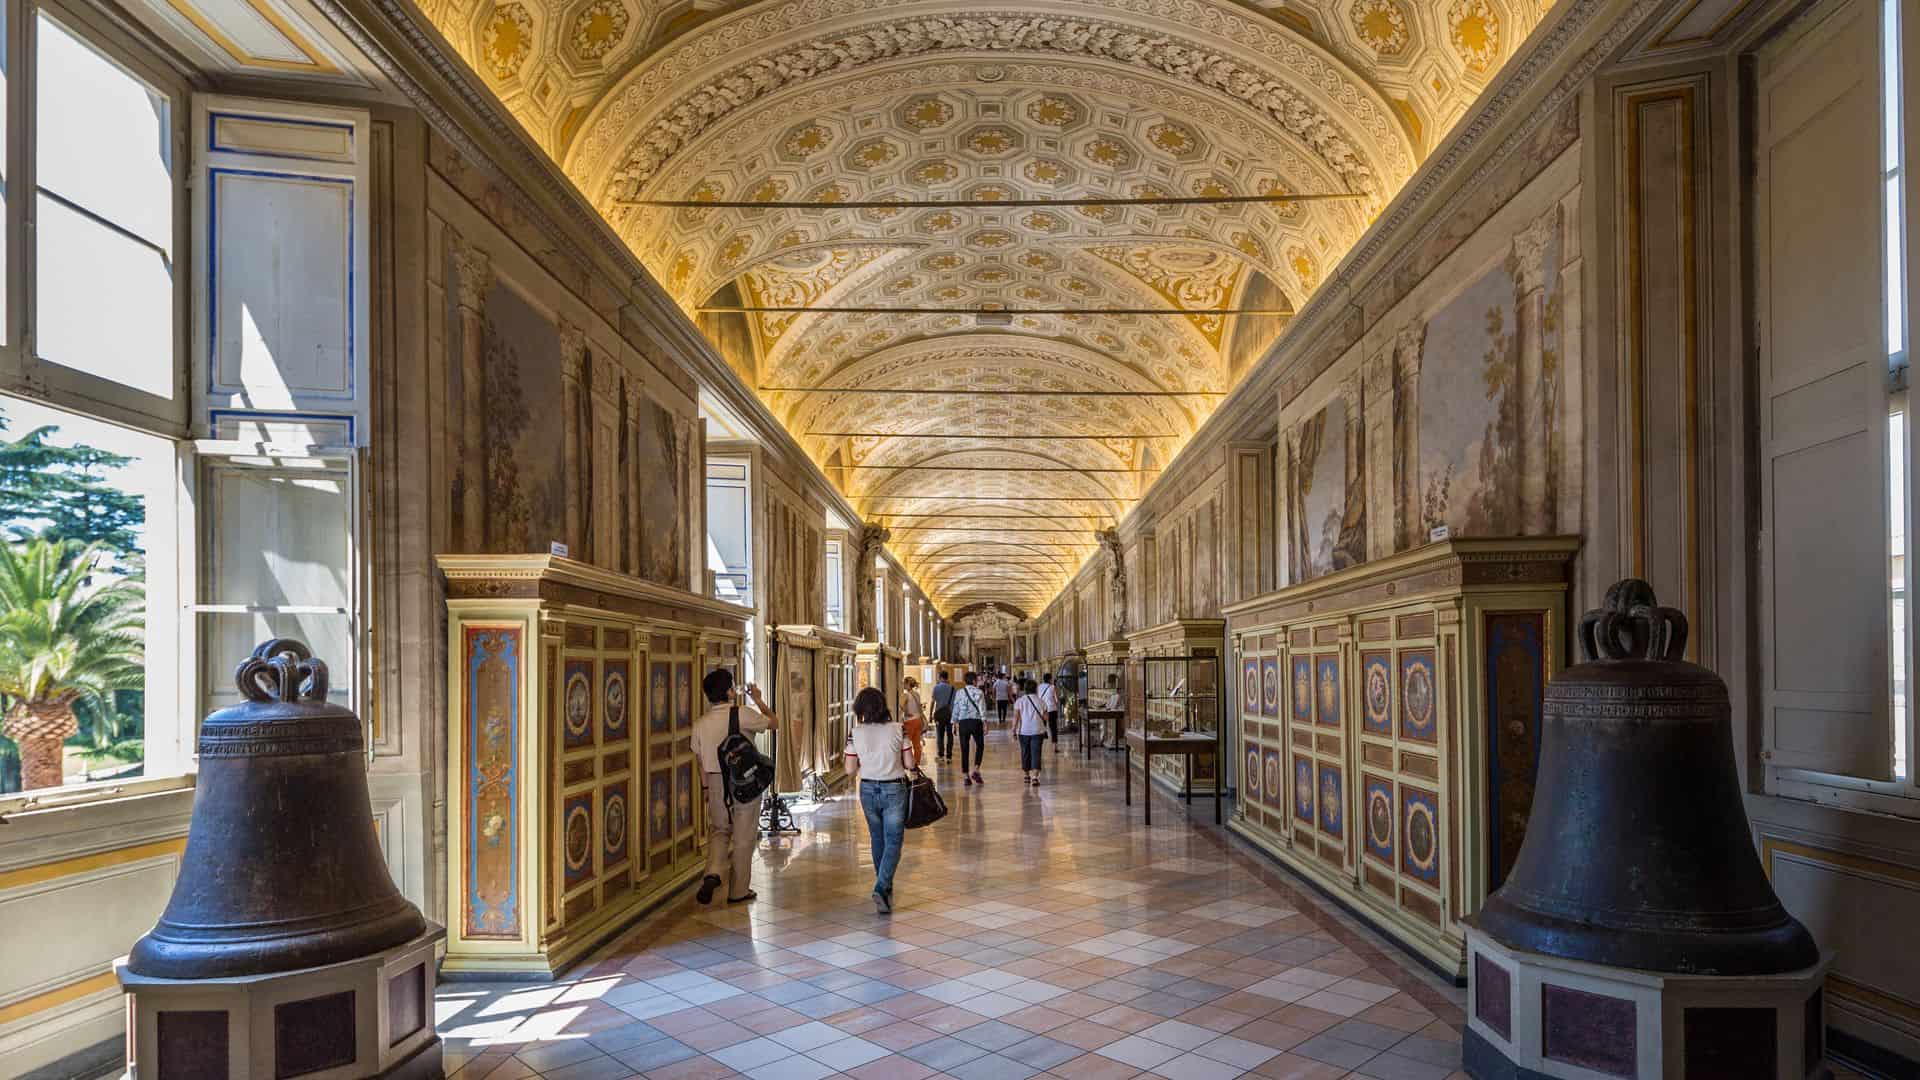 Long corridor with visitors walking around in the Vatican Museums in Rome